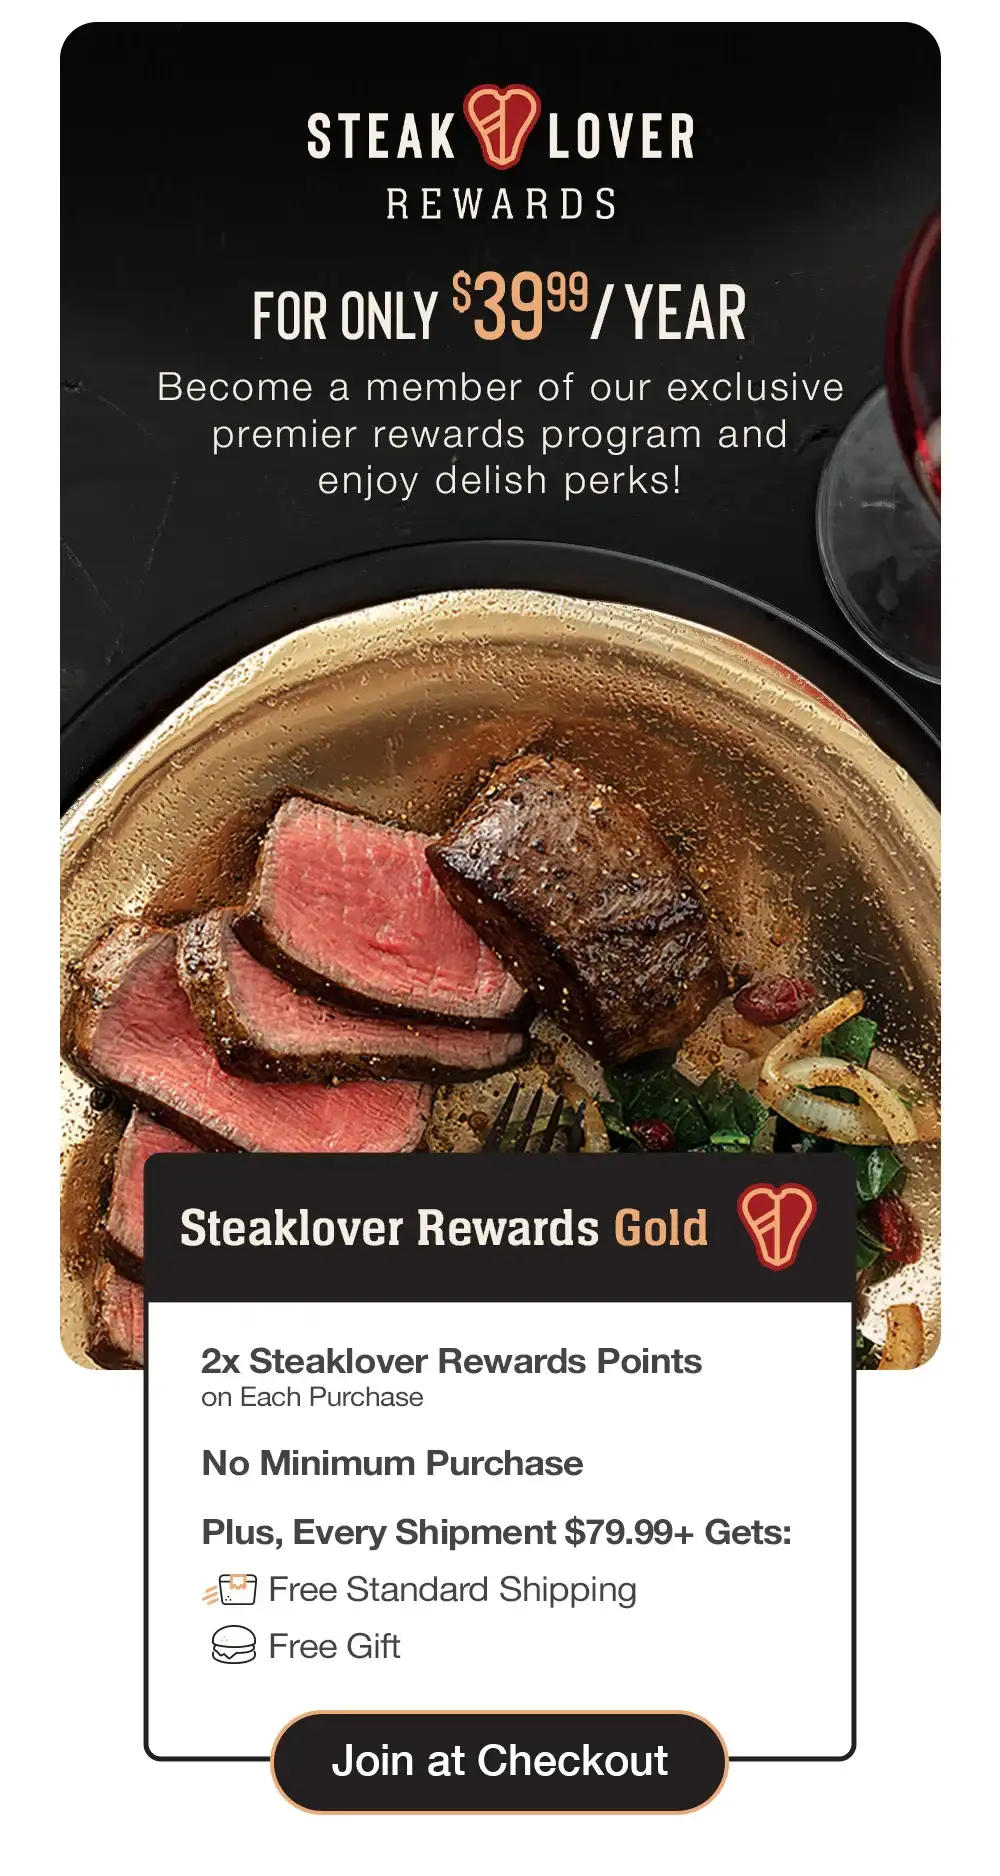 steaklover REWARDS | FOR ONLY \\$39.99/YEAR - Become a member of our exclusive premier rewards program and delish perks! | Steaklover Rewards Gold - 2x Steaklover Rewards Points on Each Purchase - No Minimum Purchase - Plus, Every Shipment \\$79.99+ Gets: Free Standard Shipping - Free Gift || Join at Checkout